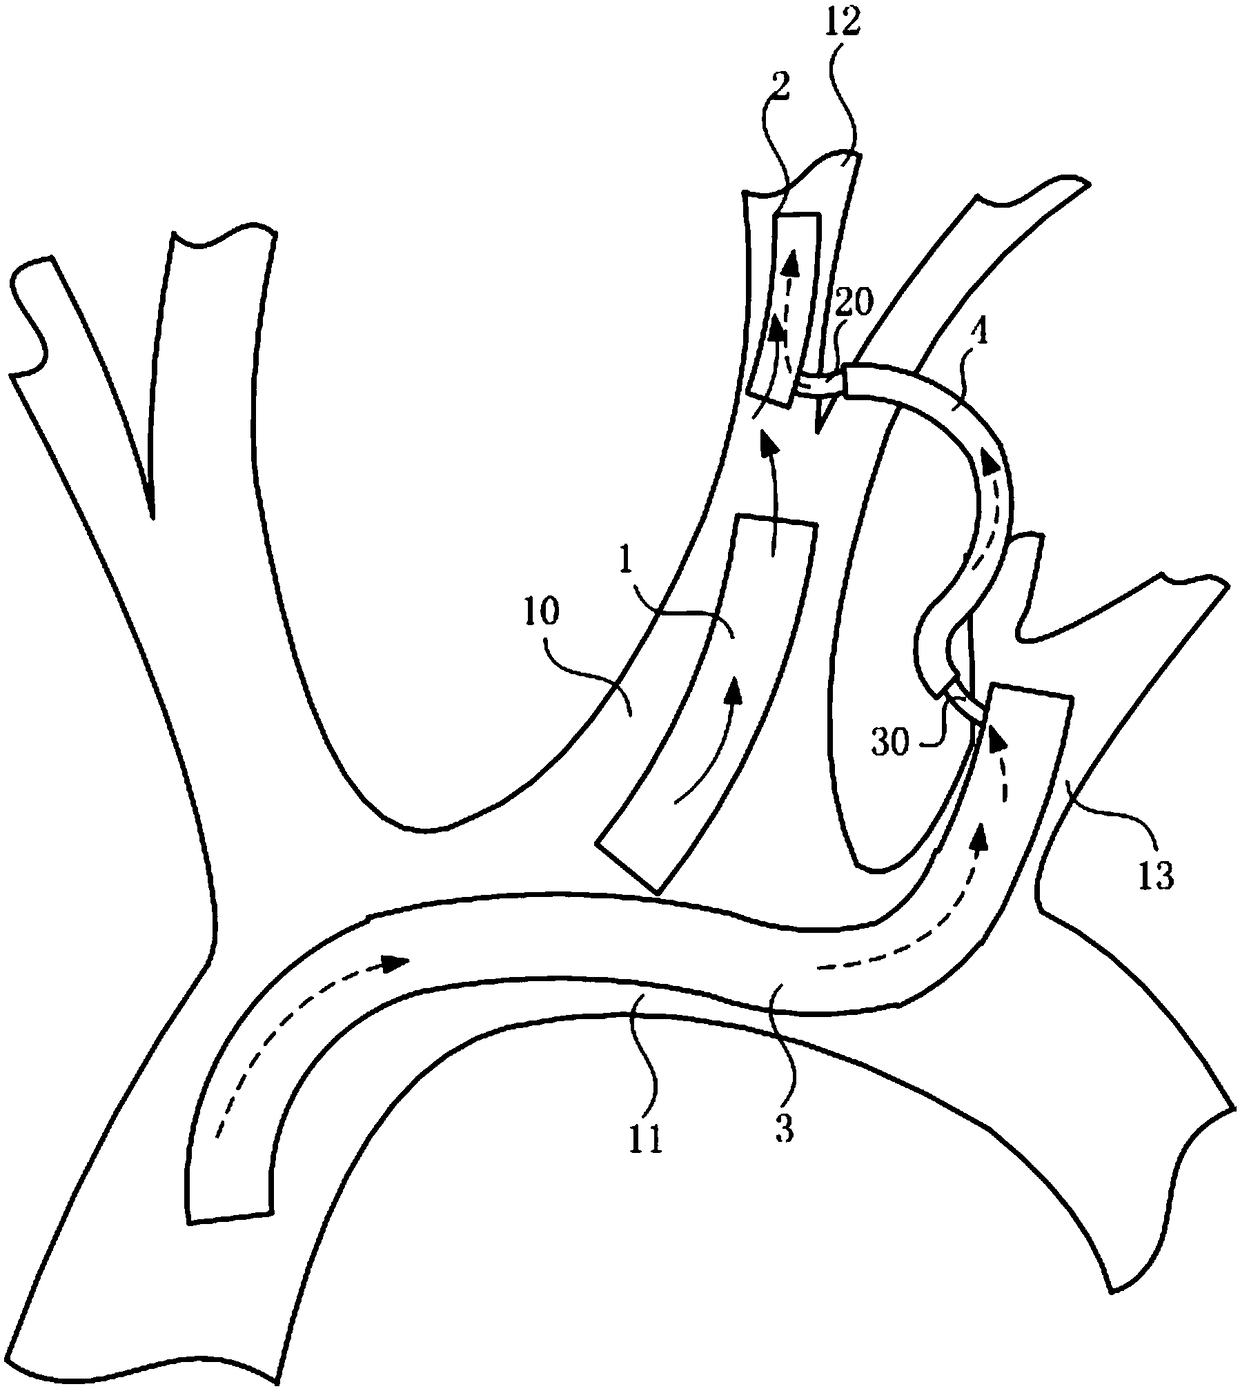 Device for intracranial bypass of aorta and left internal carotid artery